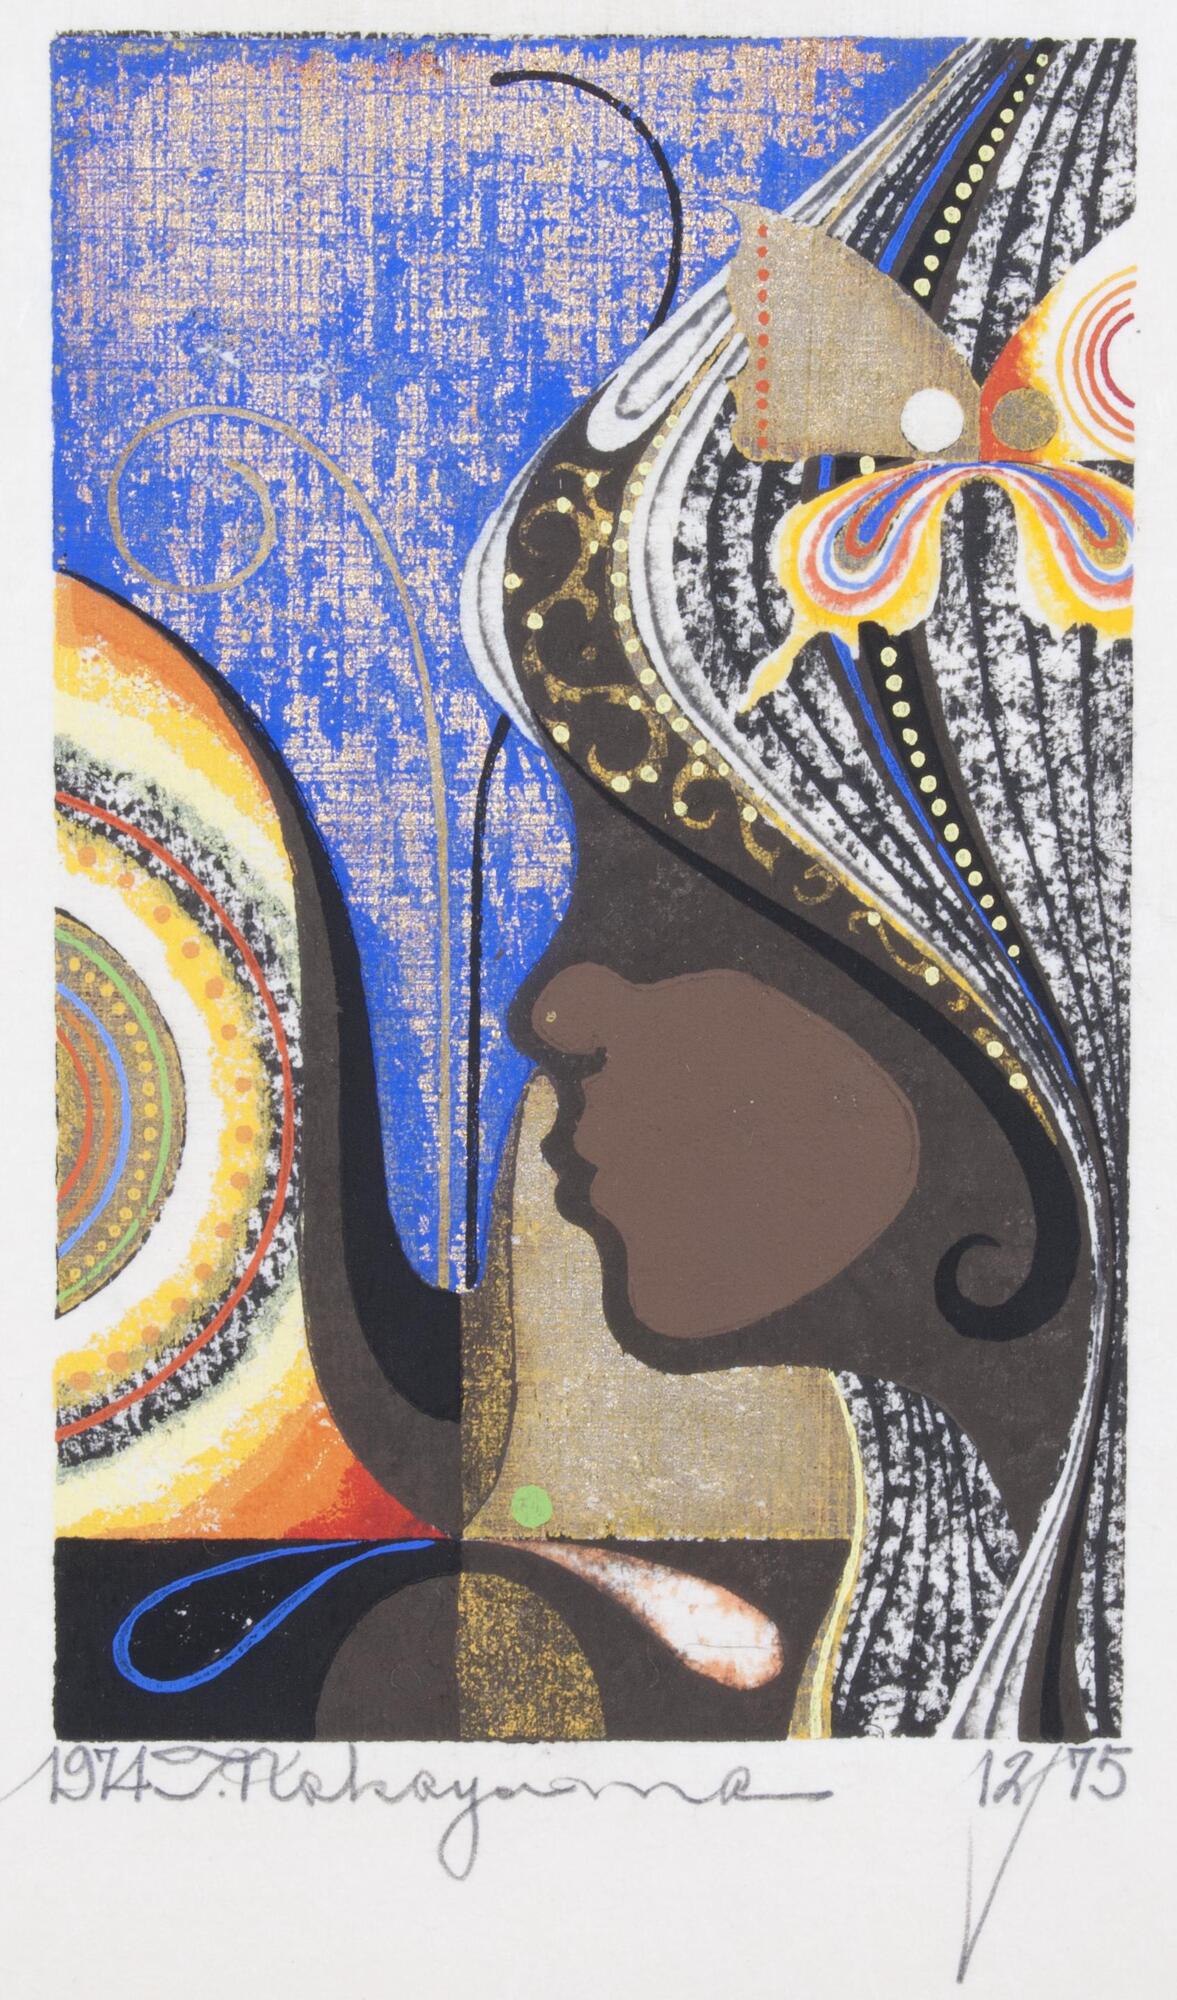 A girl with her head in profile, her black hair is highlighted with white, blue and yellow stripes, yellow columns of dots, and gold abstract curves. In her hair, there is a brown, red, yellow, and blue butterfly with abstract designs on its wing. The background of the print is blue, but the bottom half of the print is taken up by a partial view of a brown, black, red, and orange butterfly with abstract designs on its wings.